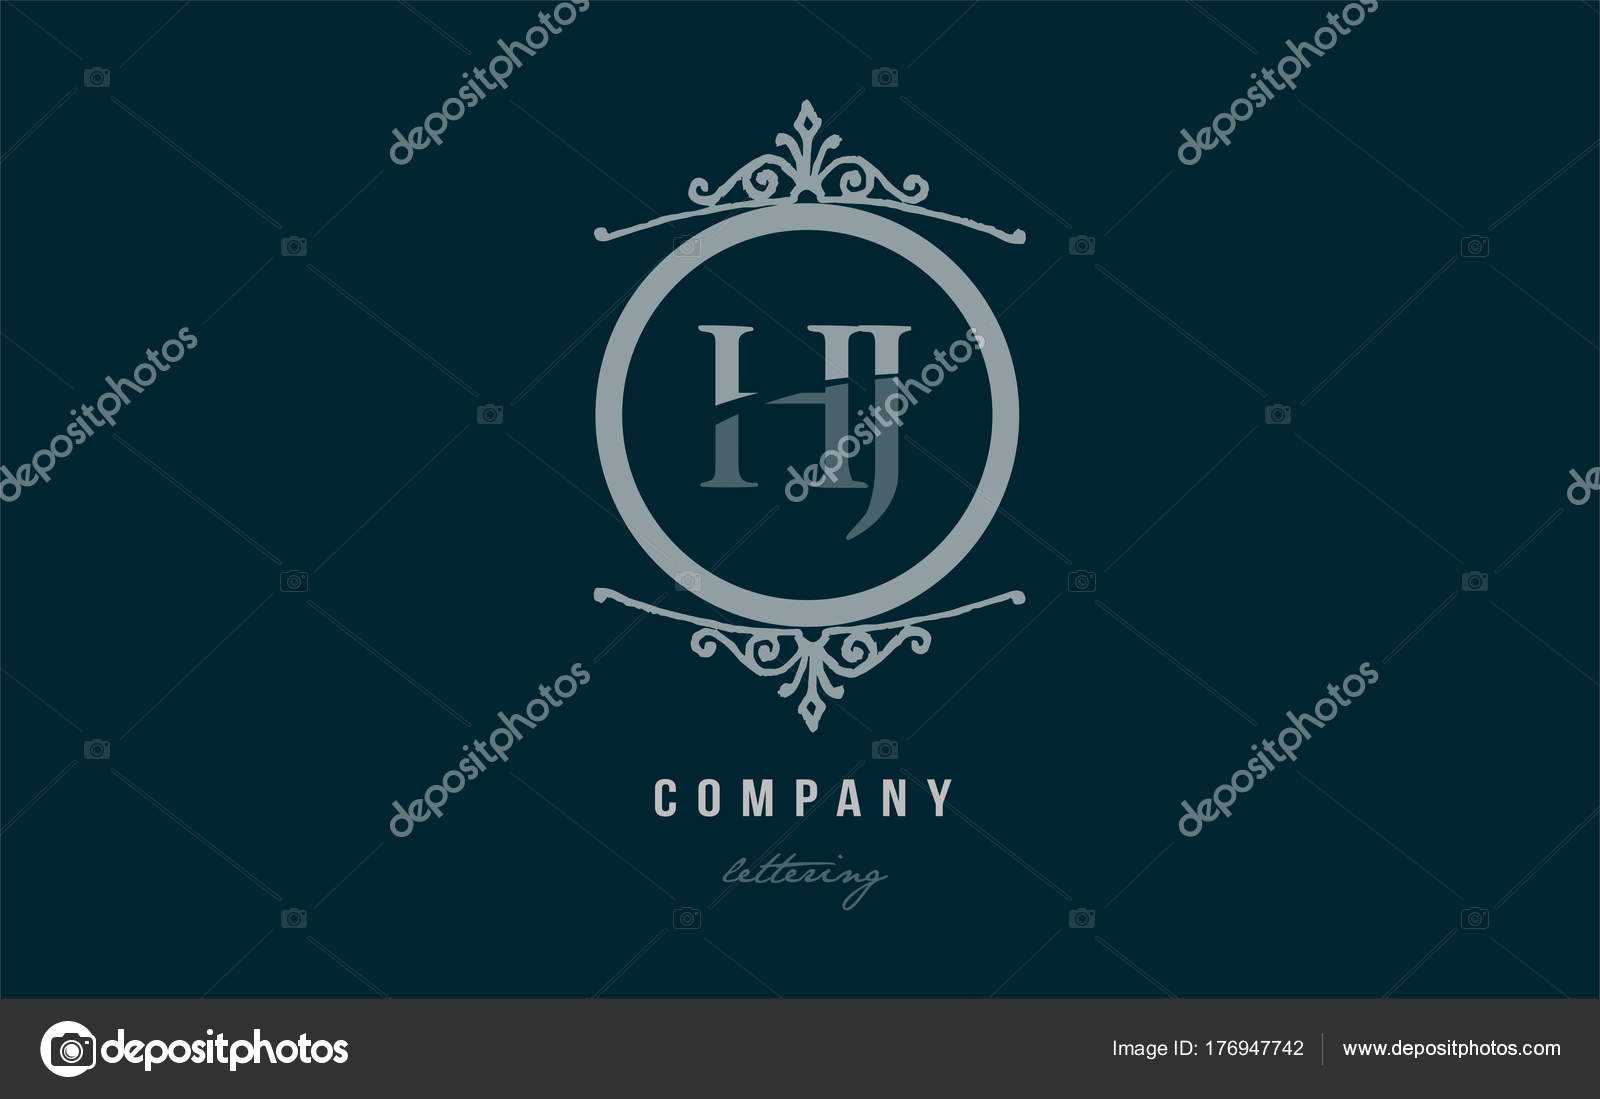 1 302 Hj Vectors Royalty Free Vector Hj Images Depositphotos